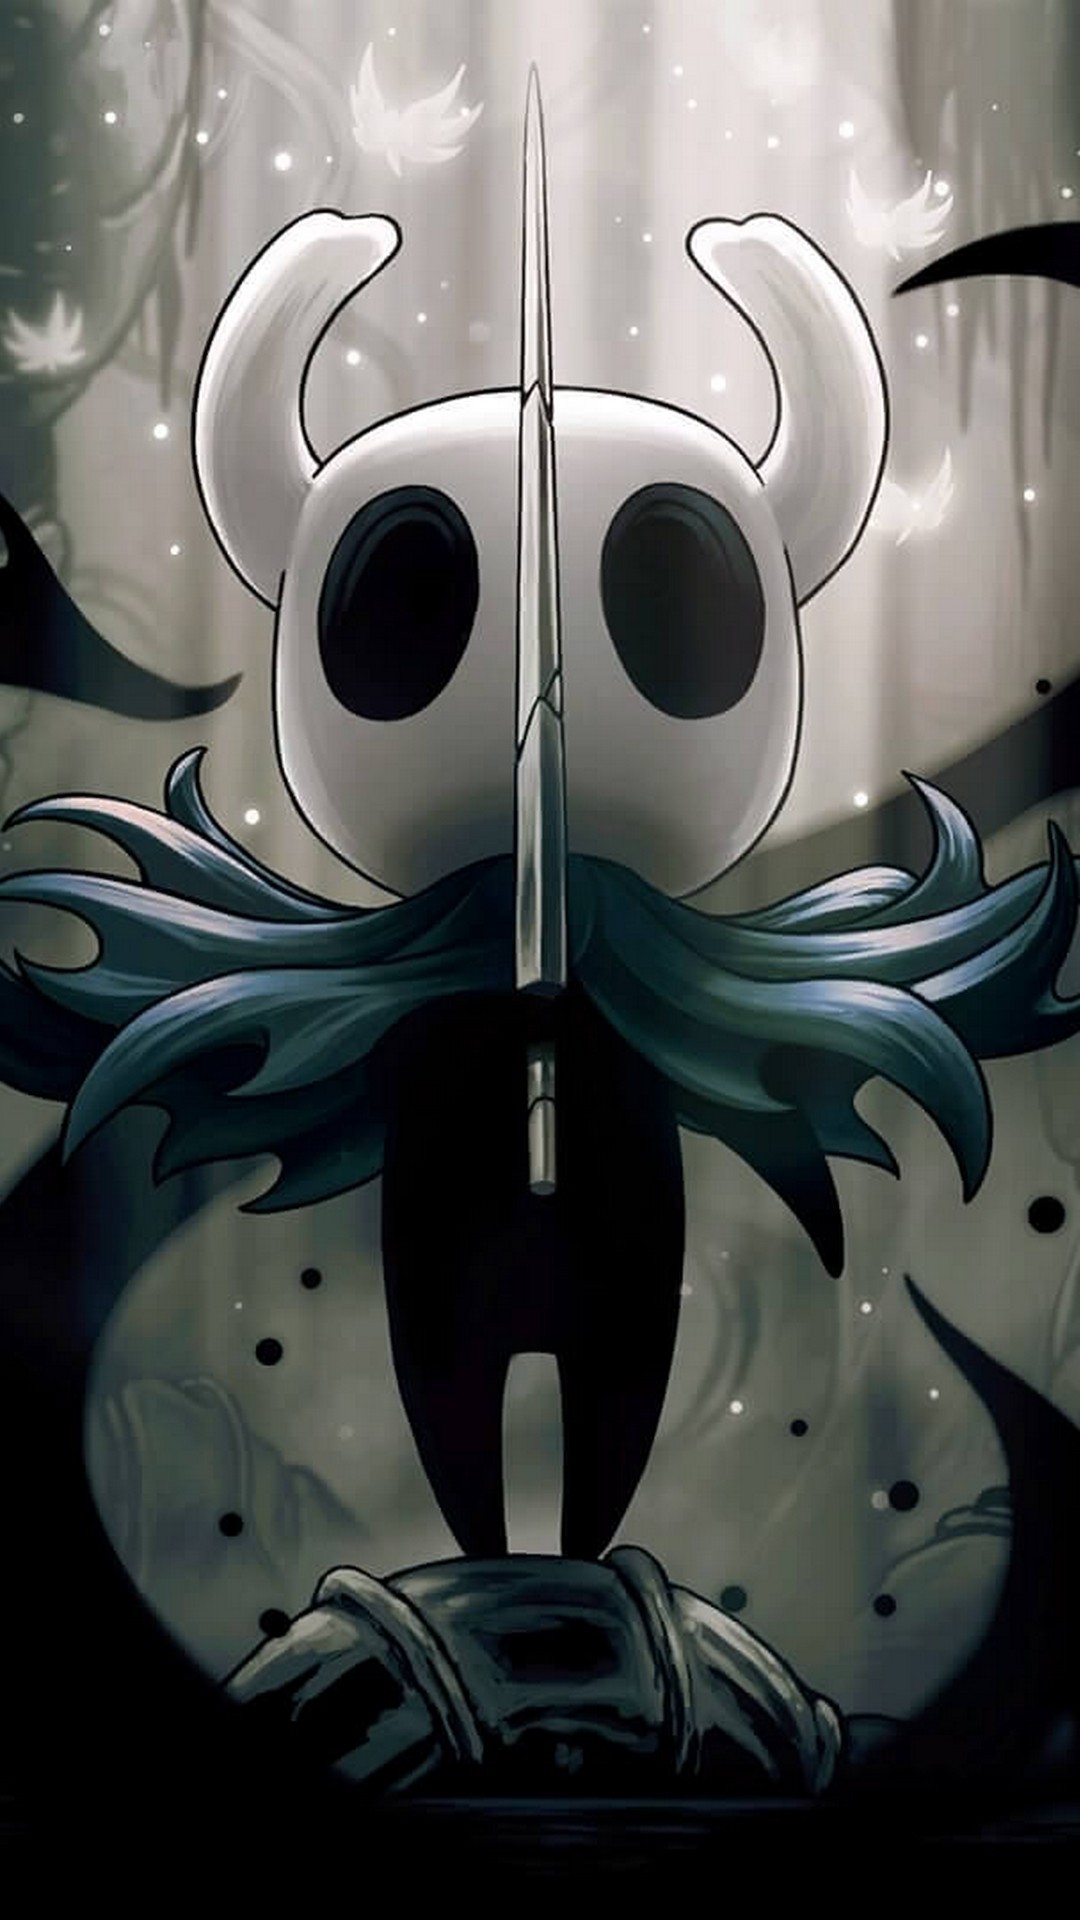 Hollow Knight Wallpaper For Android With high-resolution 1080X1920 pixel. You can use this wallpaper for your Android backgrounds, Tablet, Samsung Screensavers, Mobile Phone Lock Screen and another Smartphones device